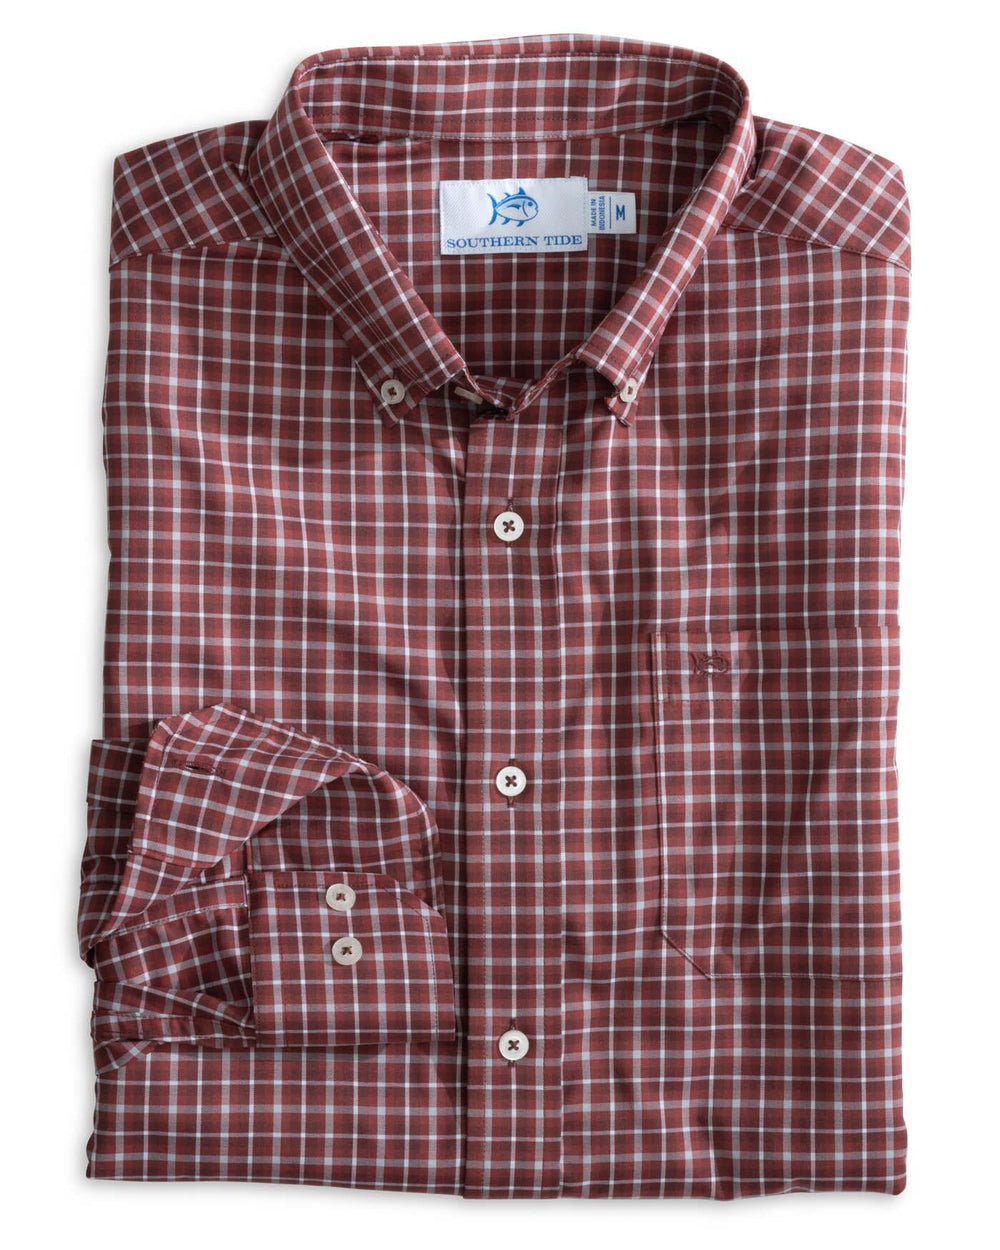 The front view of the Southern Tide Intercoastal Ardmore Plaid Long Sleeve Sportshirt by Southern Tide - Bordeaux Red